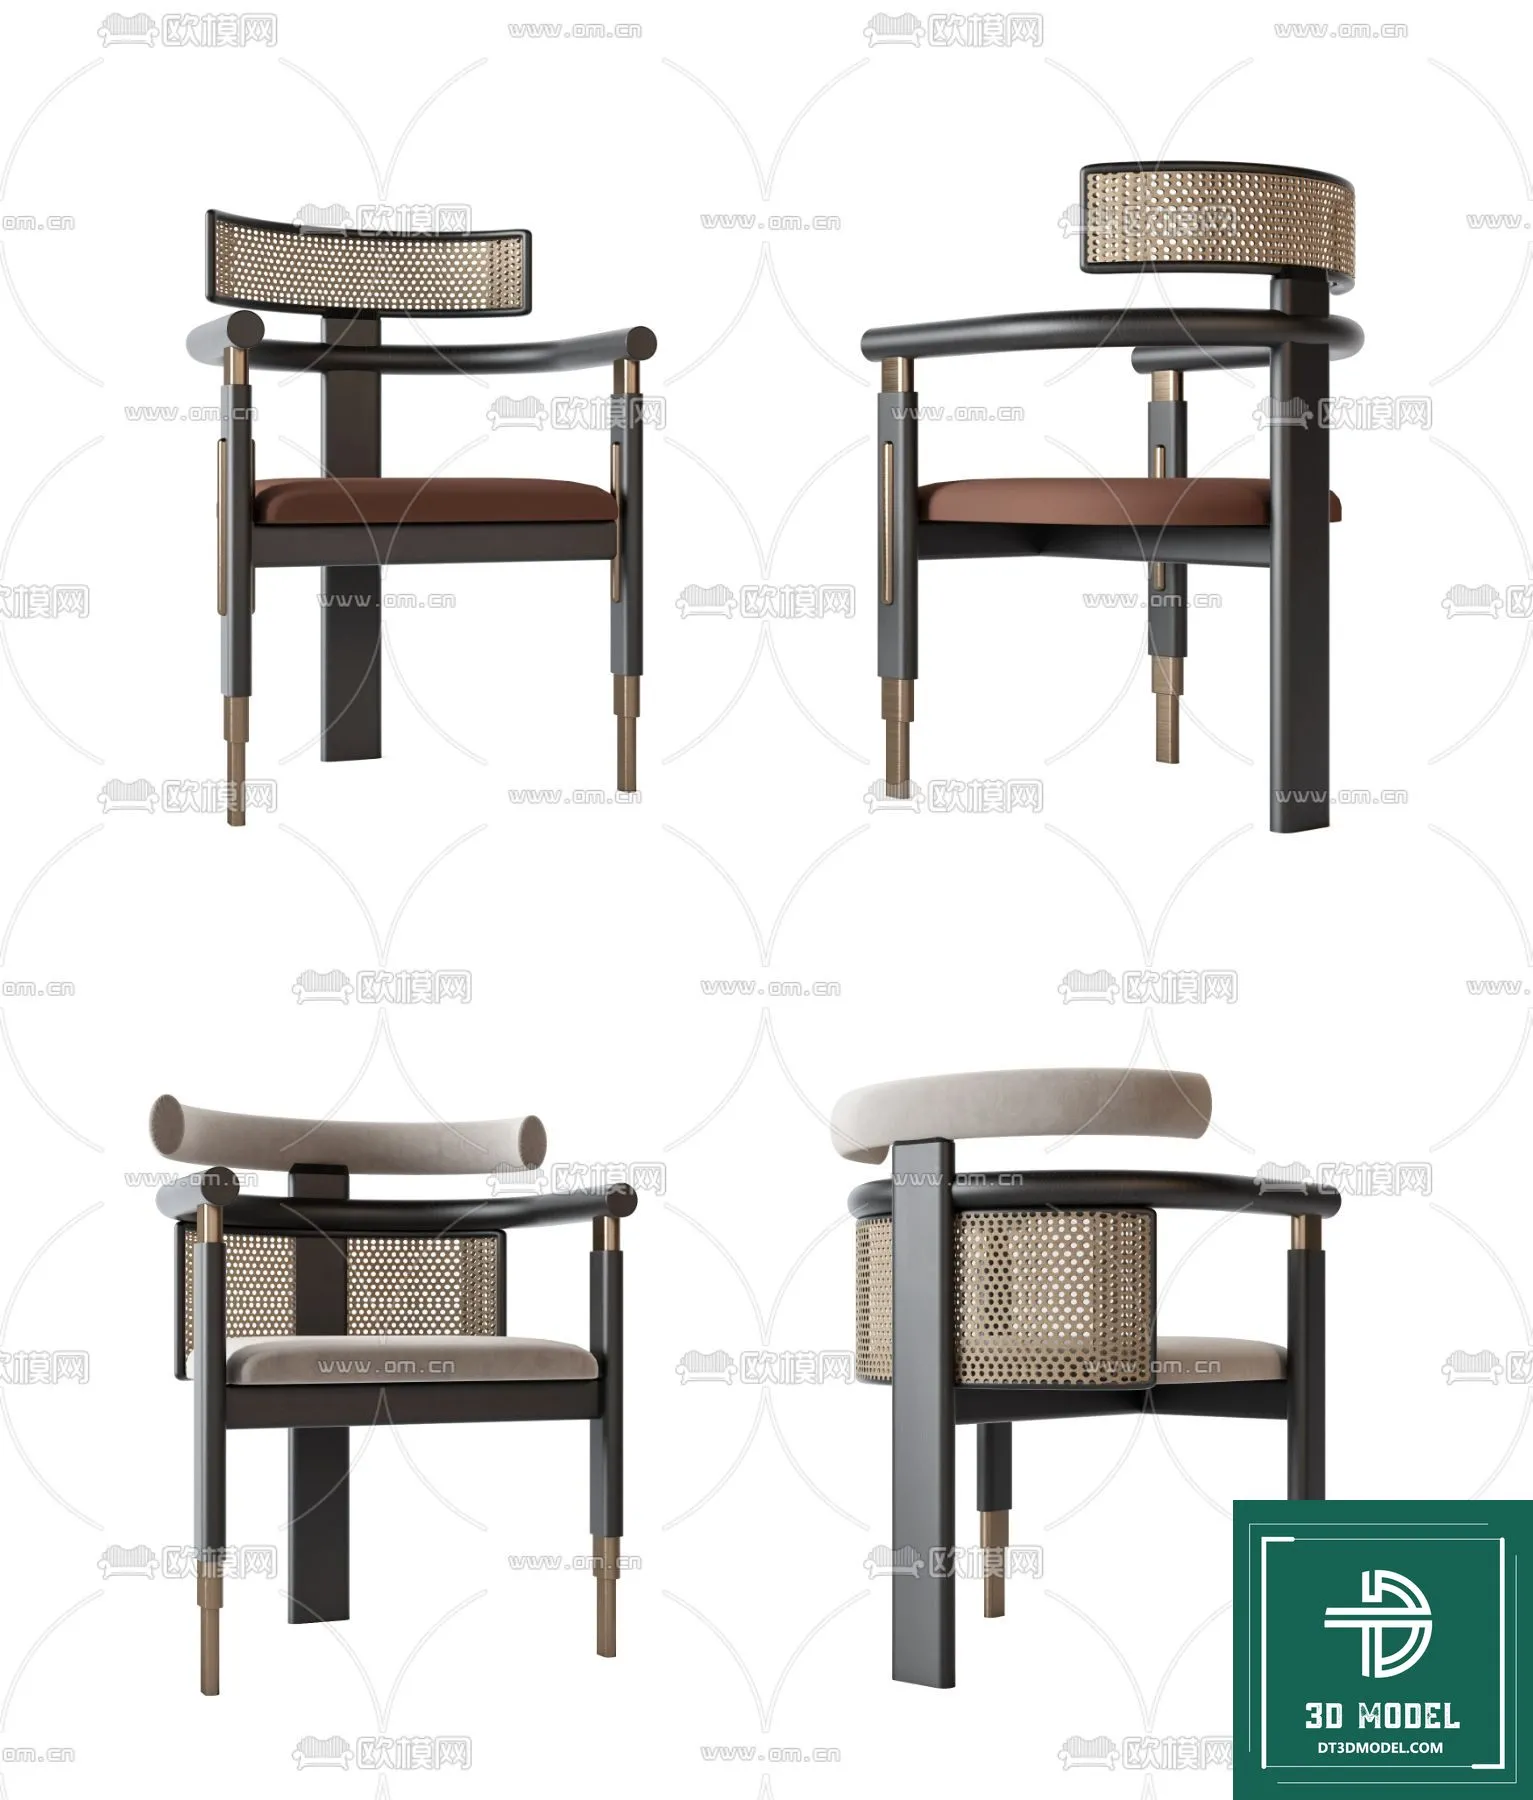 INDOCHINE STYLE – 3D MODELS – 400